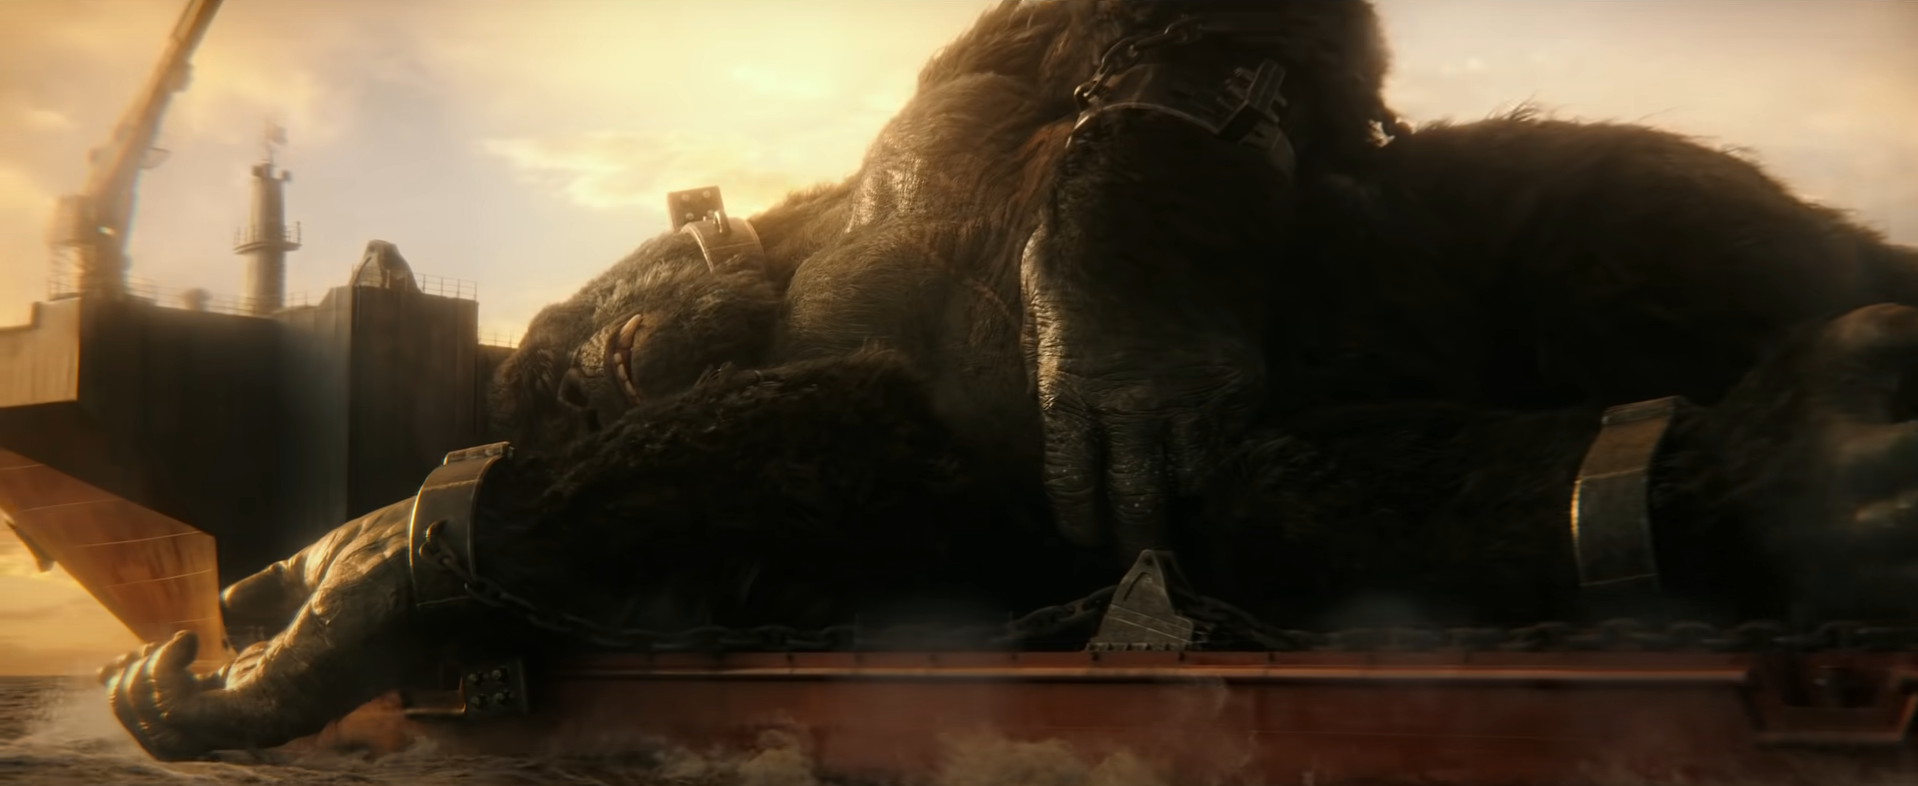 King Kong sleeps on the back of an aircraft carrier, held down by manacles.